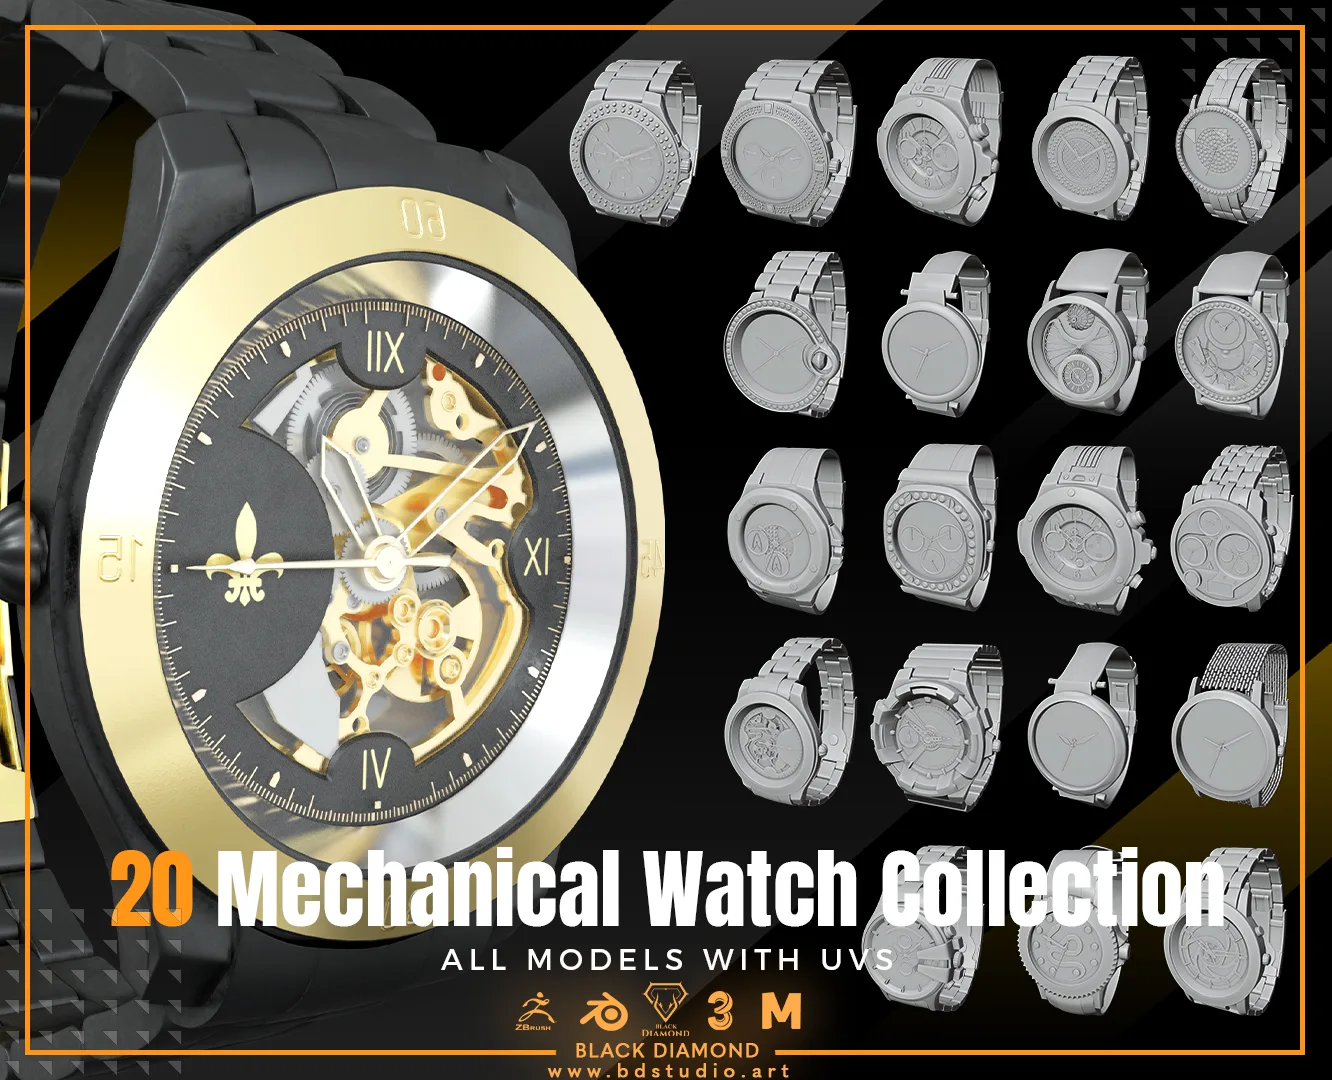 20 Mechanical Watch Collection